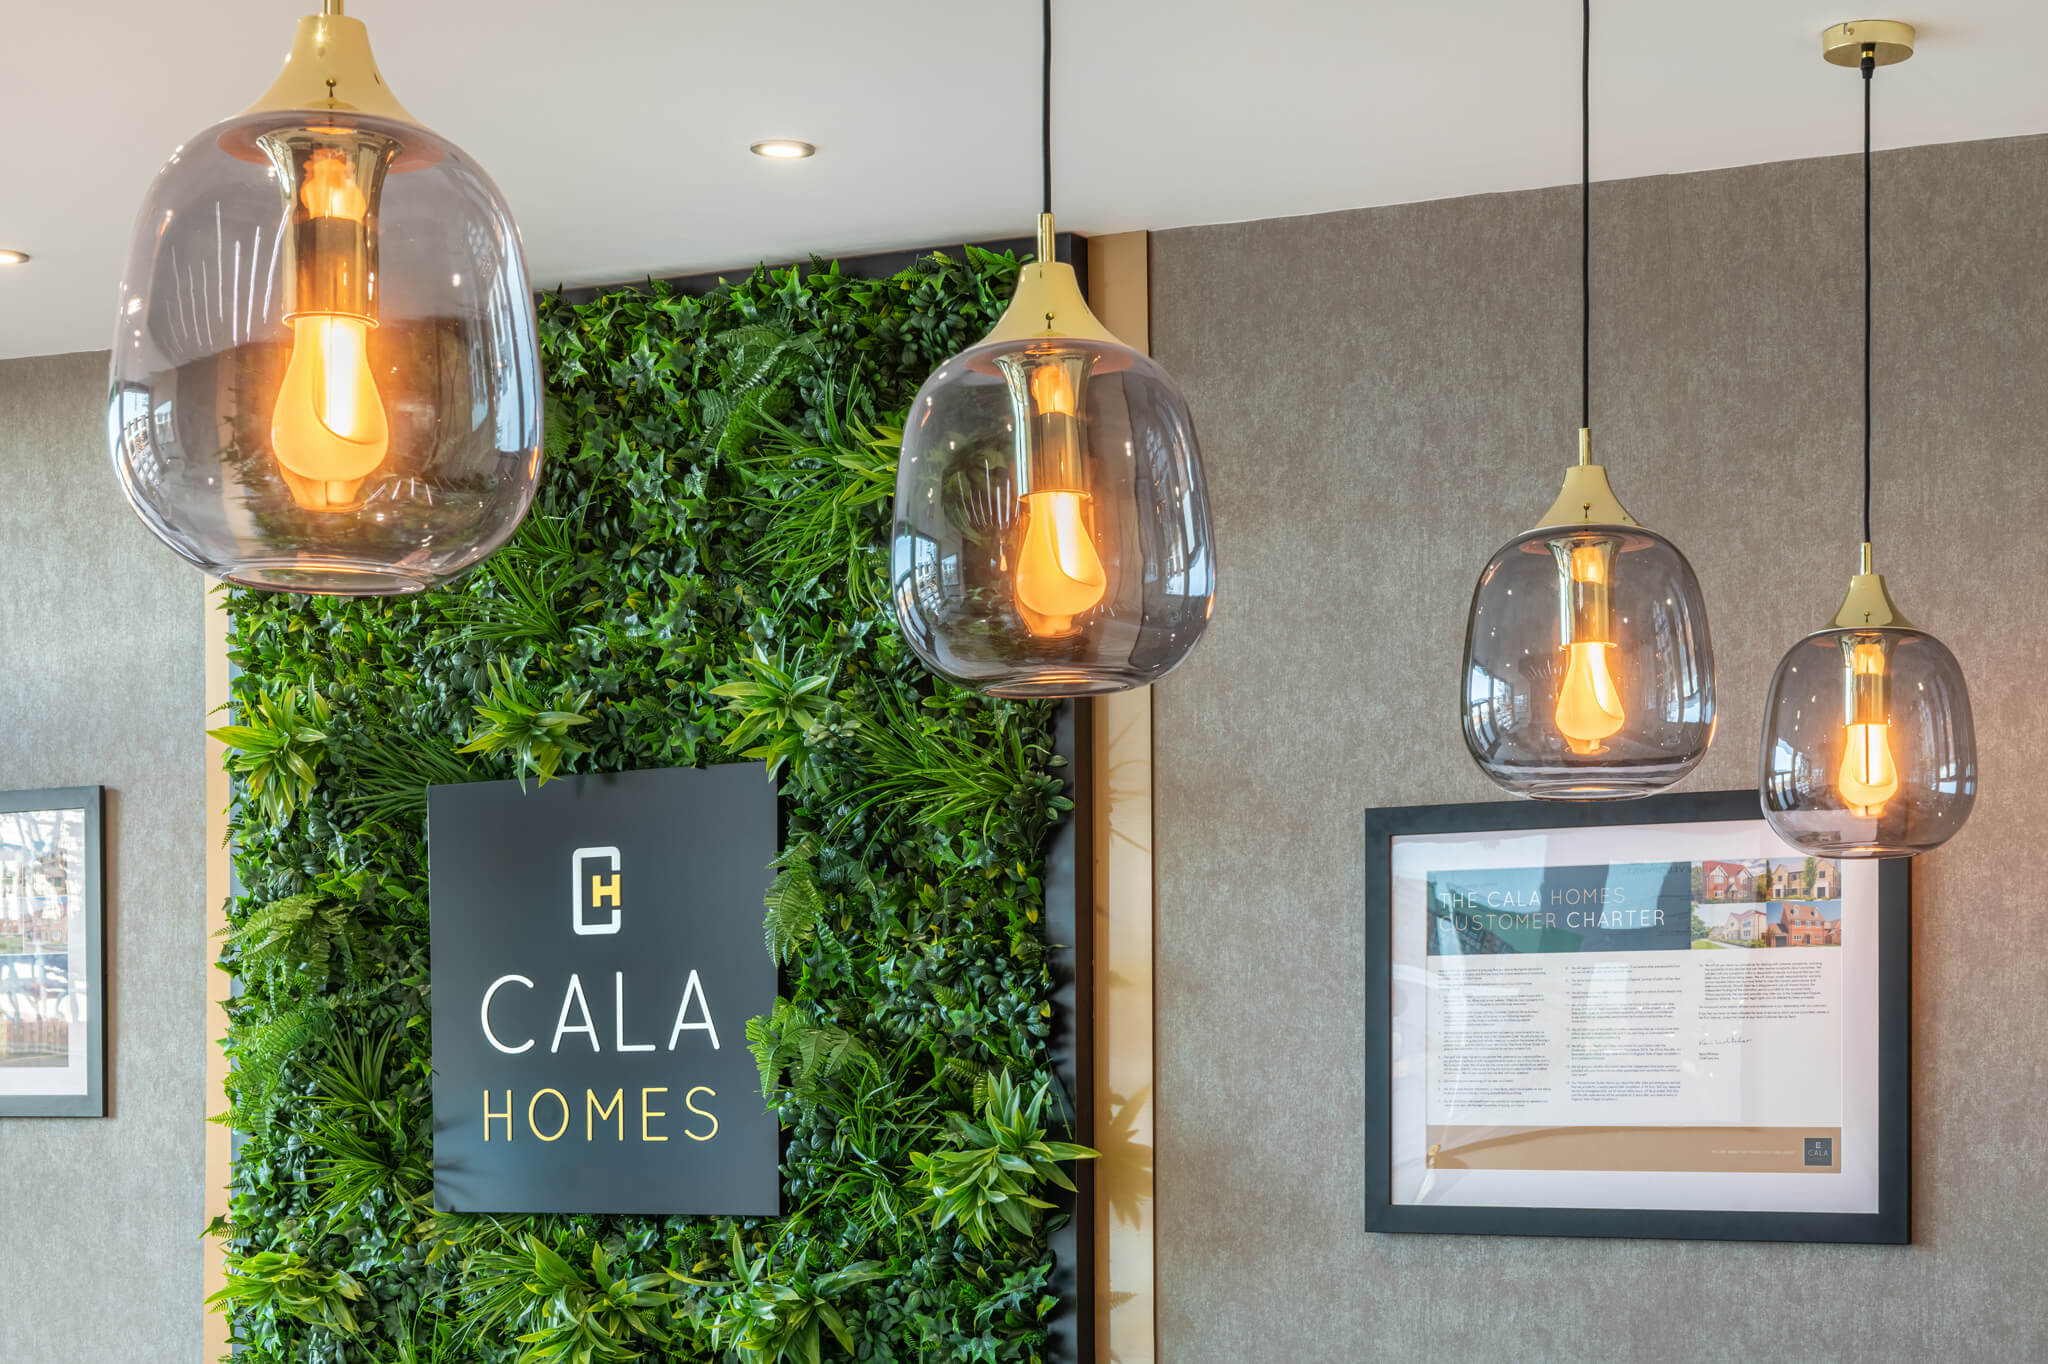 Cala Homes sign on a artificial plant backdrop